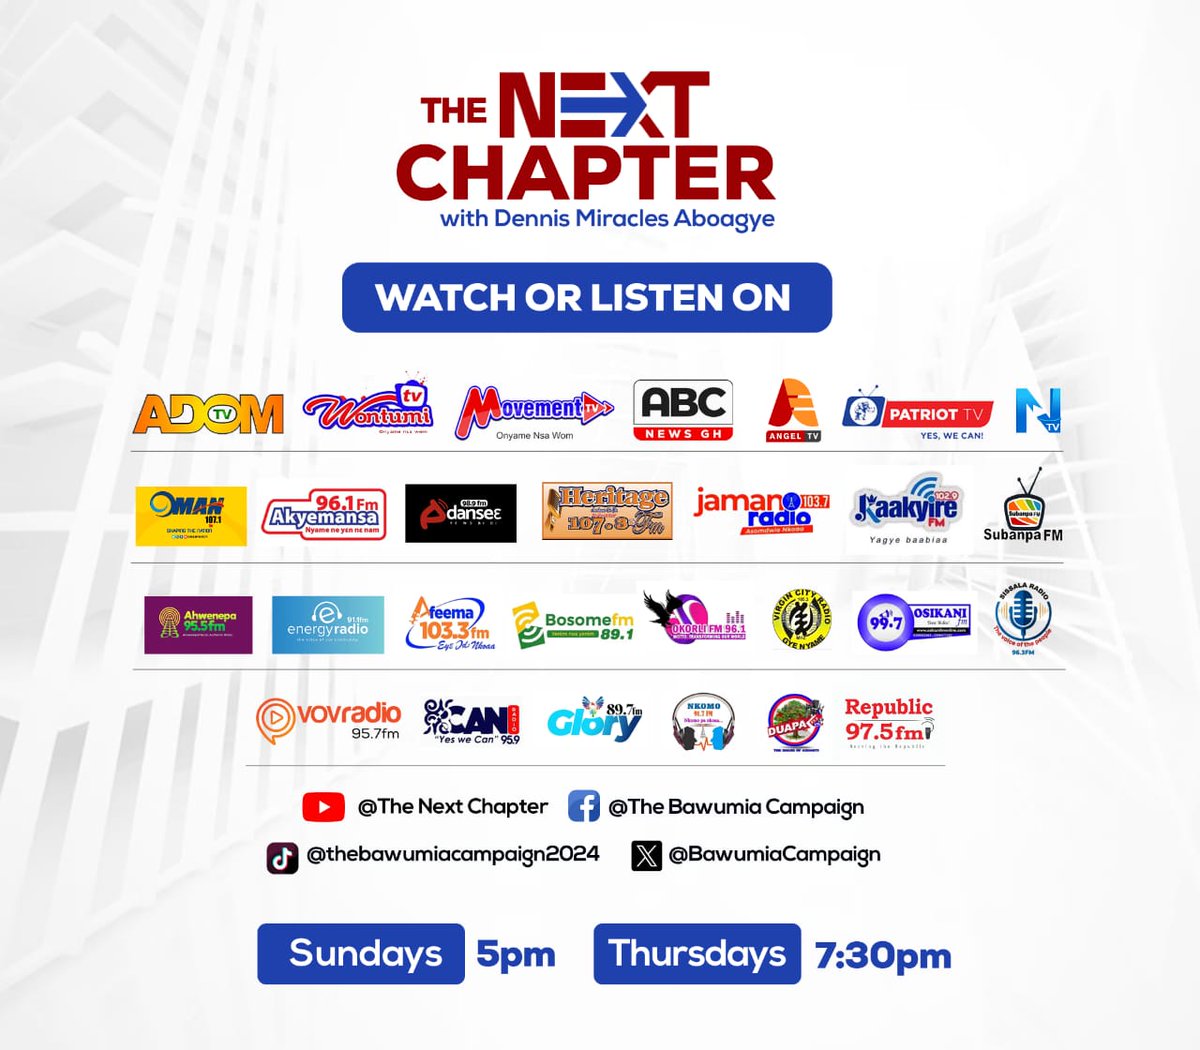 #GhanasNextChapter show is devoid of insults, bickery and lies.

Its gonna be insightful and purposeful.
Don't miss it!
#ItIsPossible
#Bawumia2024
#BoldSolutionsForTheFuture